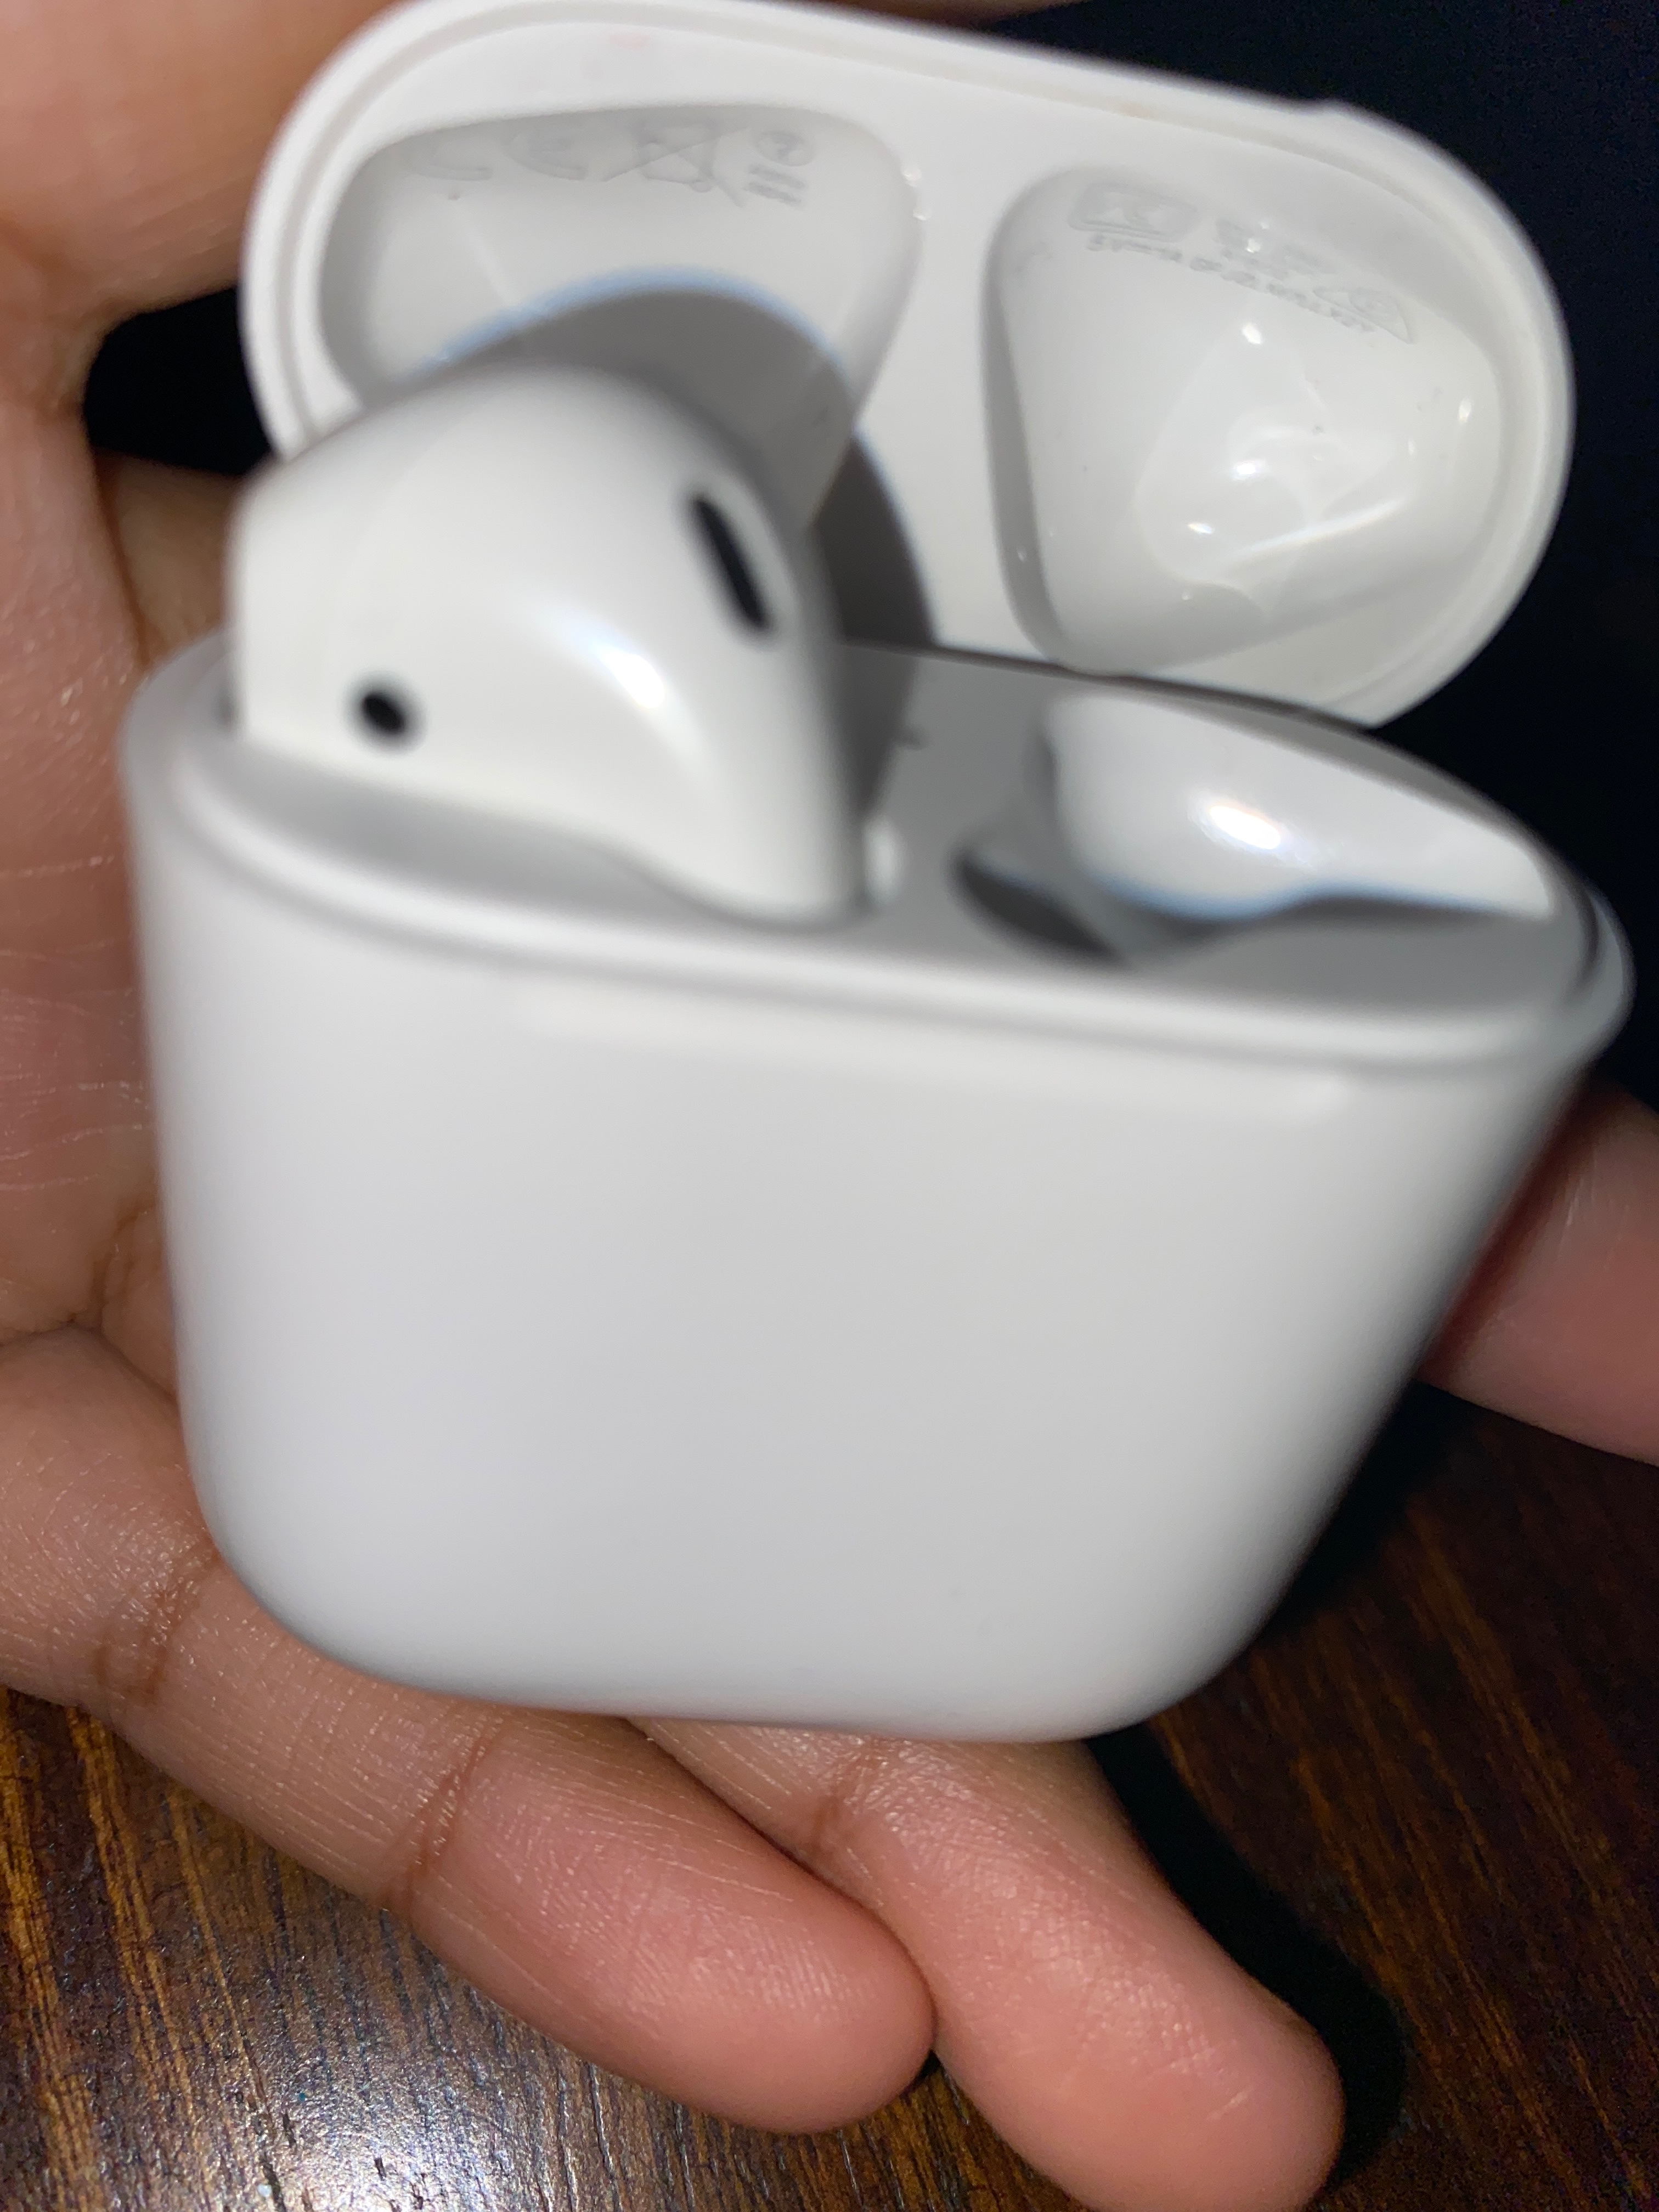 & lost AirPods At Home - Apple